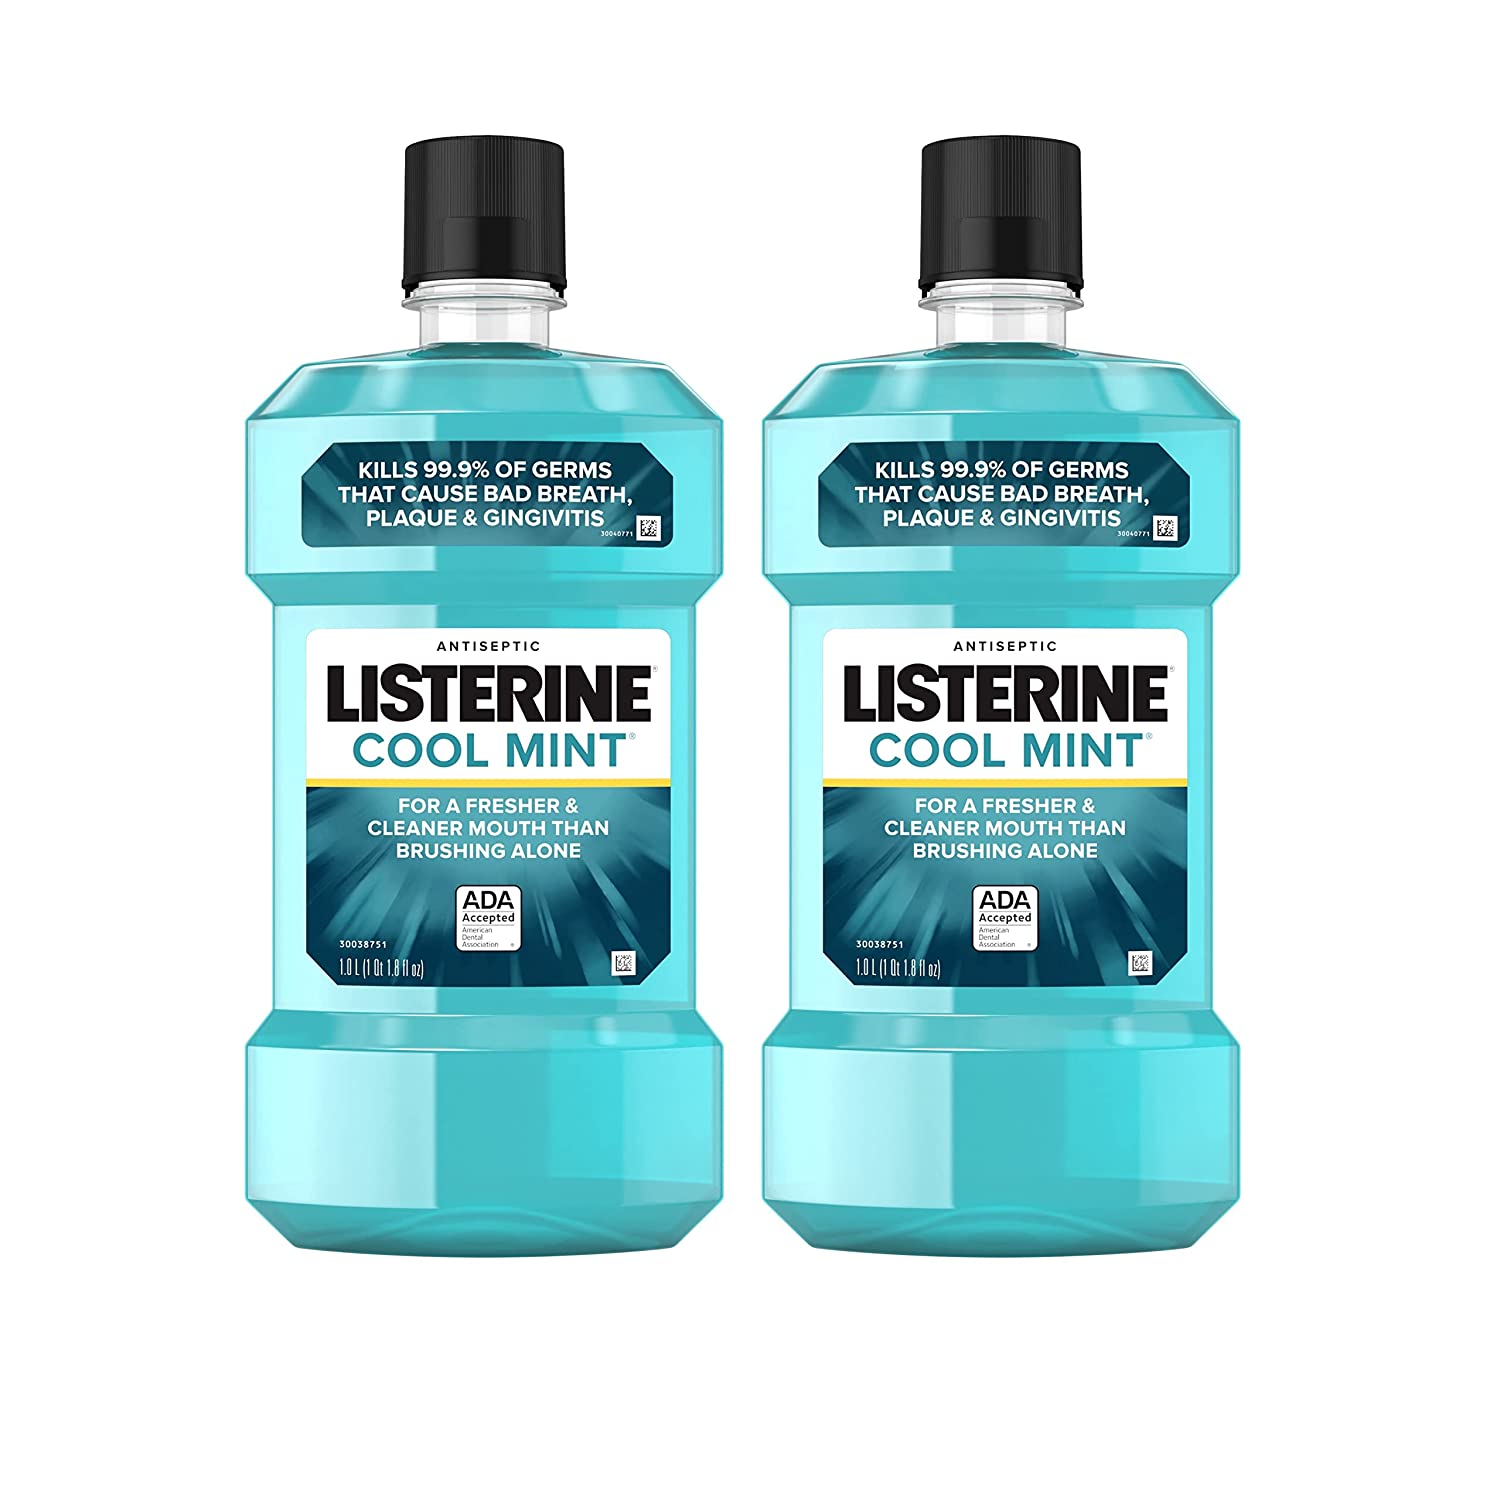 Listerine Cool Mint Antiseptic Mouthwash to Kill 99% of Germs That